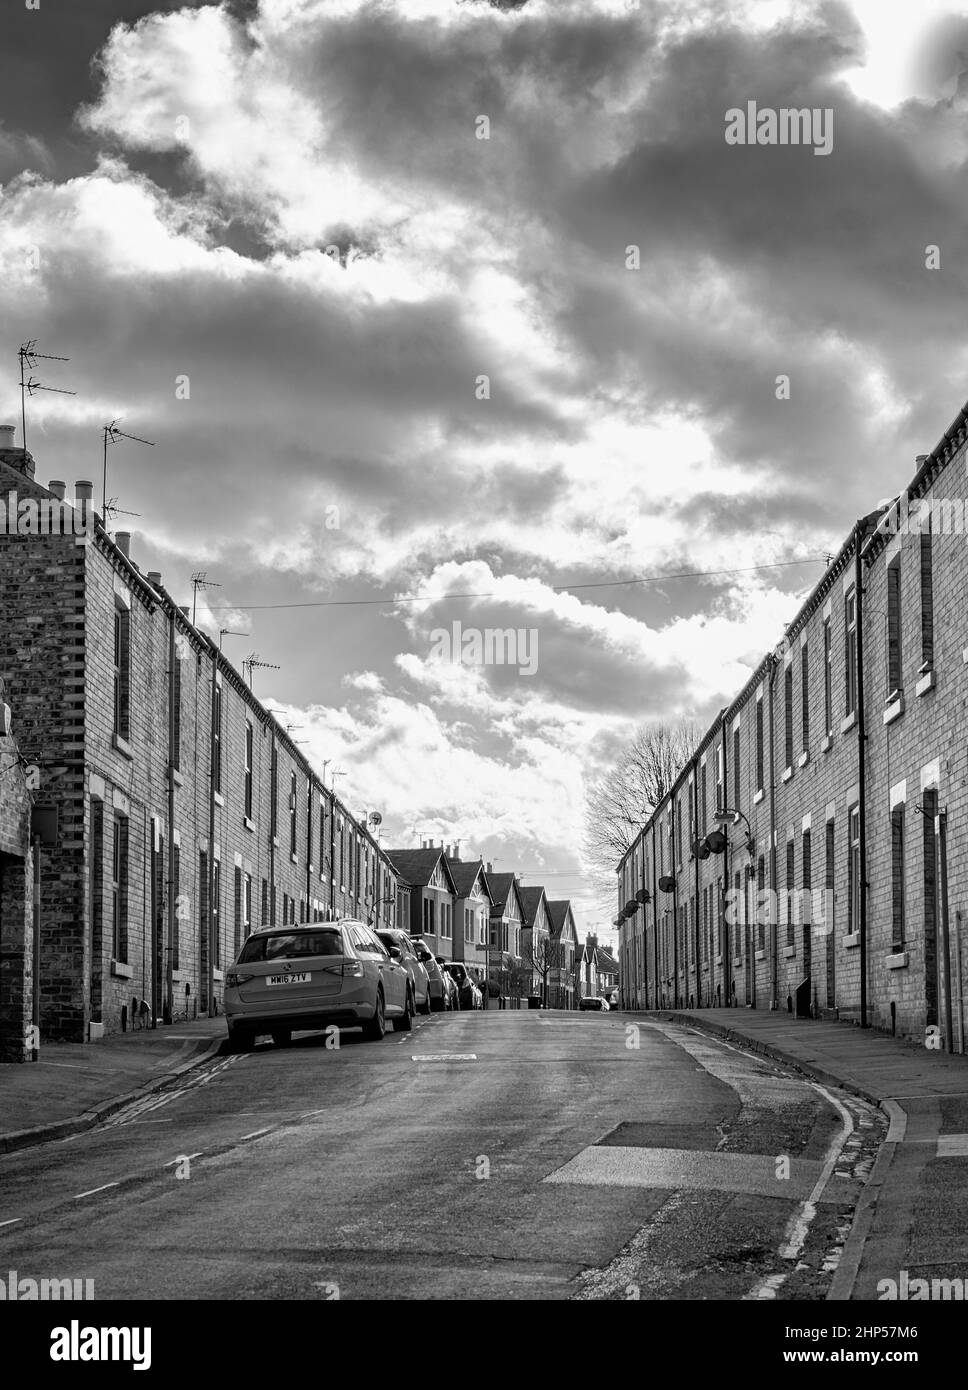 A street with neat terraced houses are situated on a rise, sloping upwards. Cars are parked on one side and a cloudy sky is above Stock Photo